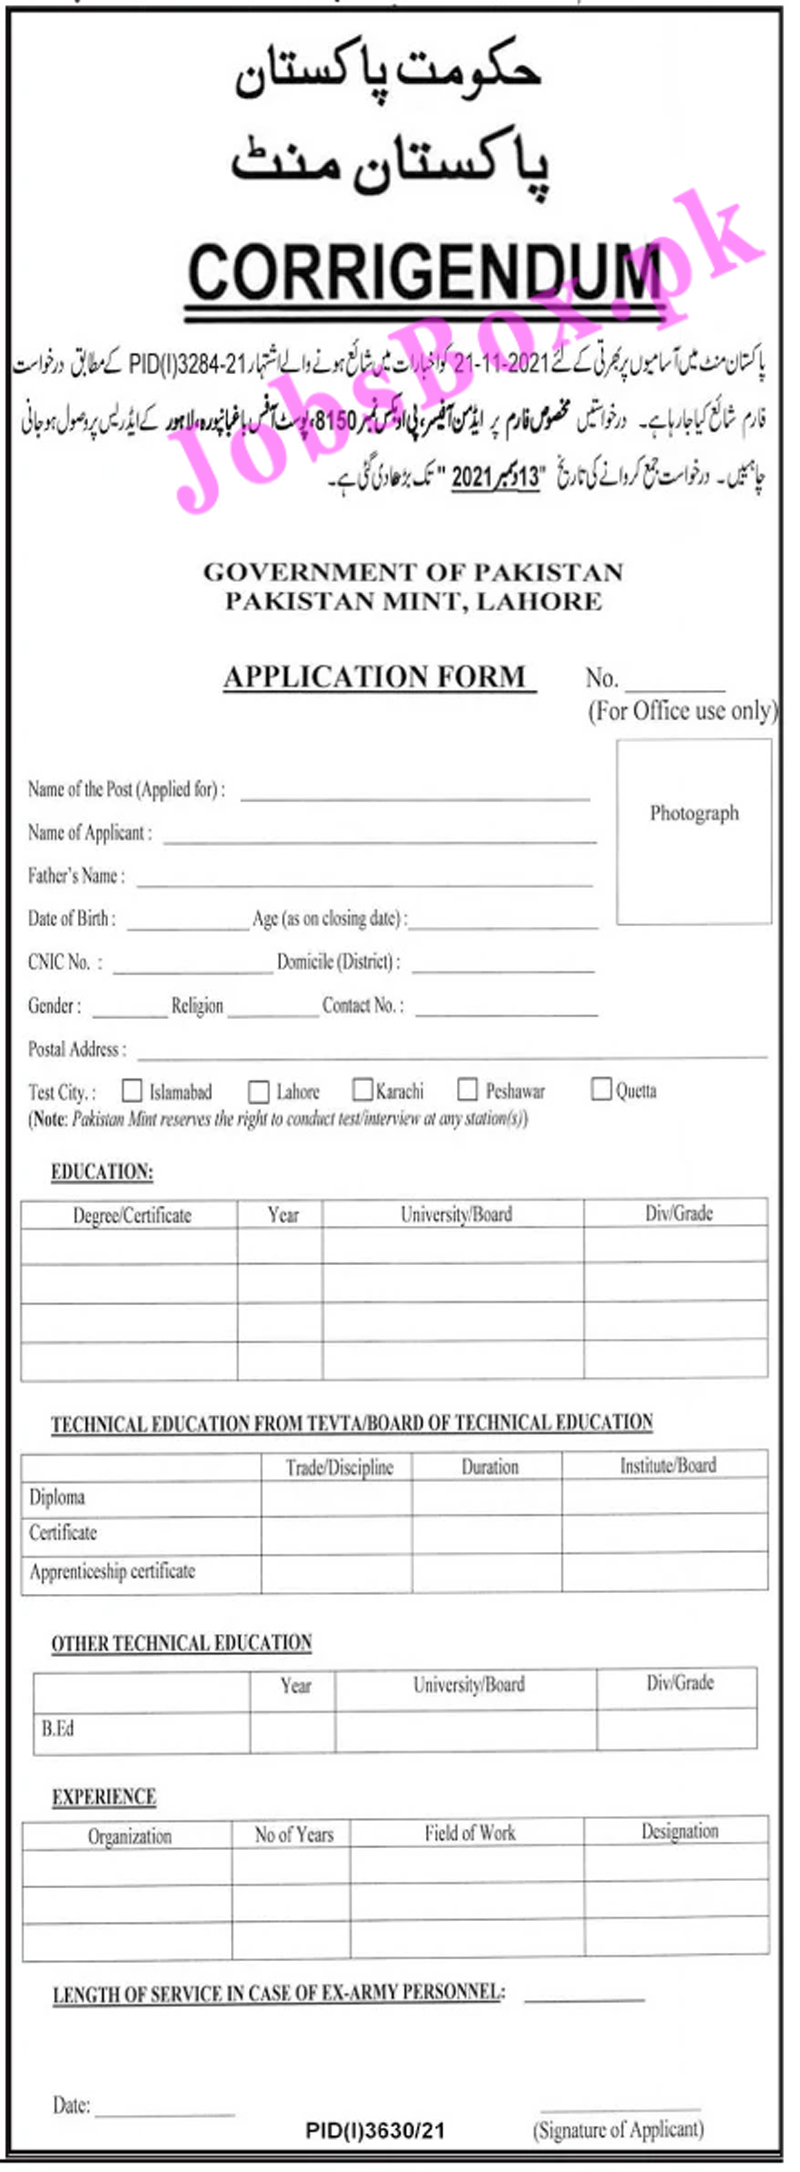 Government of Pakistan Mint Jobs 2021 - Download Application Form